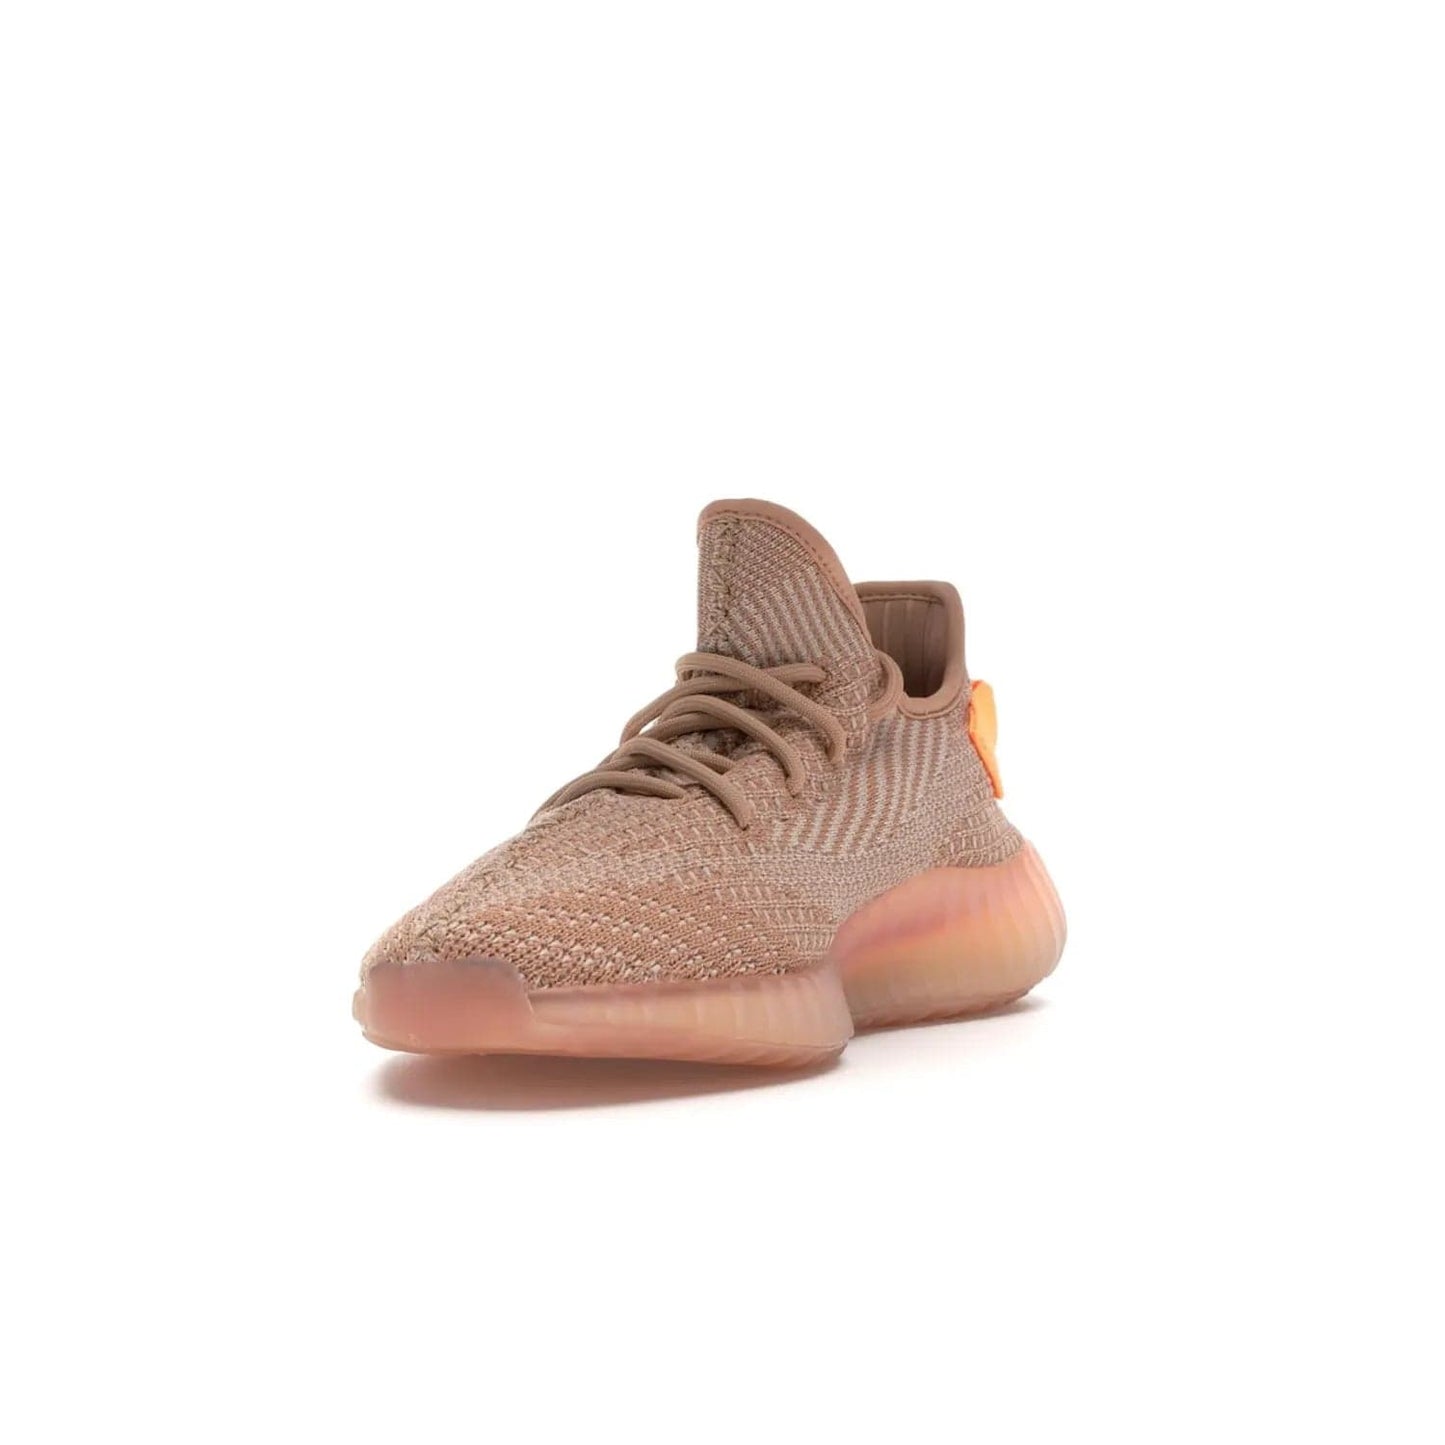 adidas Yeezy Boost 350 V2 Clay - Image 13 - Only at www.BallersClubKickz.com - The adidas Yeezy Boost 350 V2 Clay - style and swag in one shoe. Orange accents, clay midsole and sole. Get yours today!